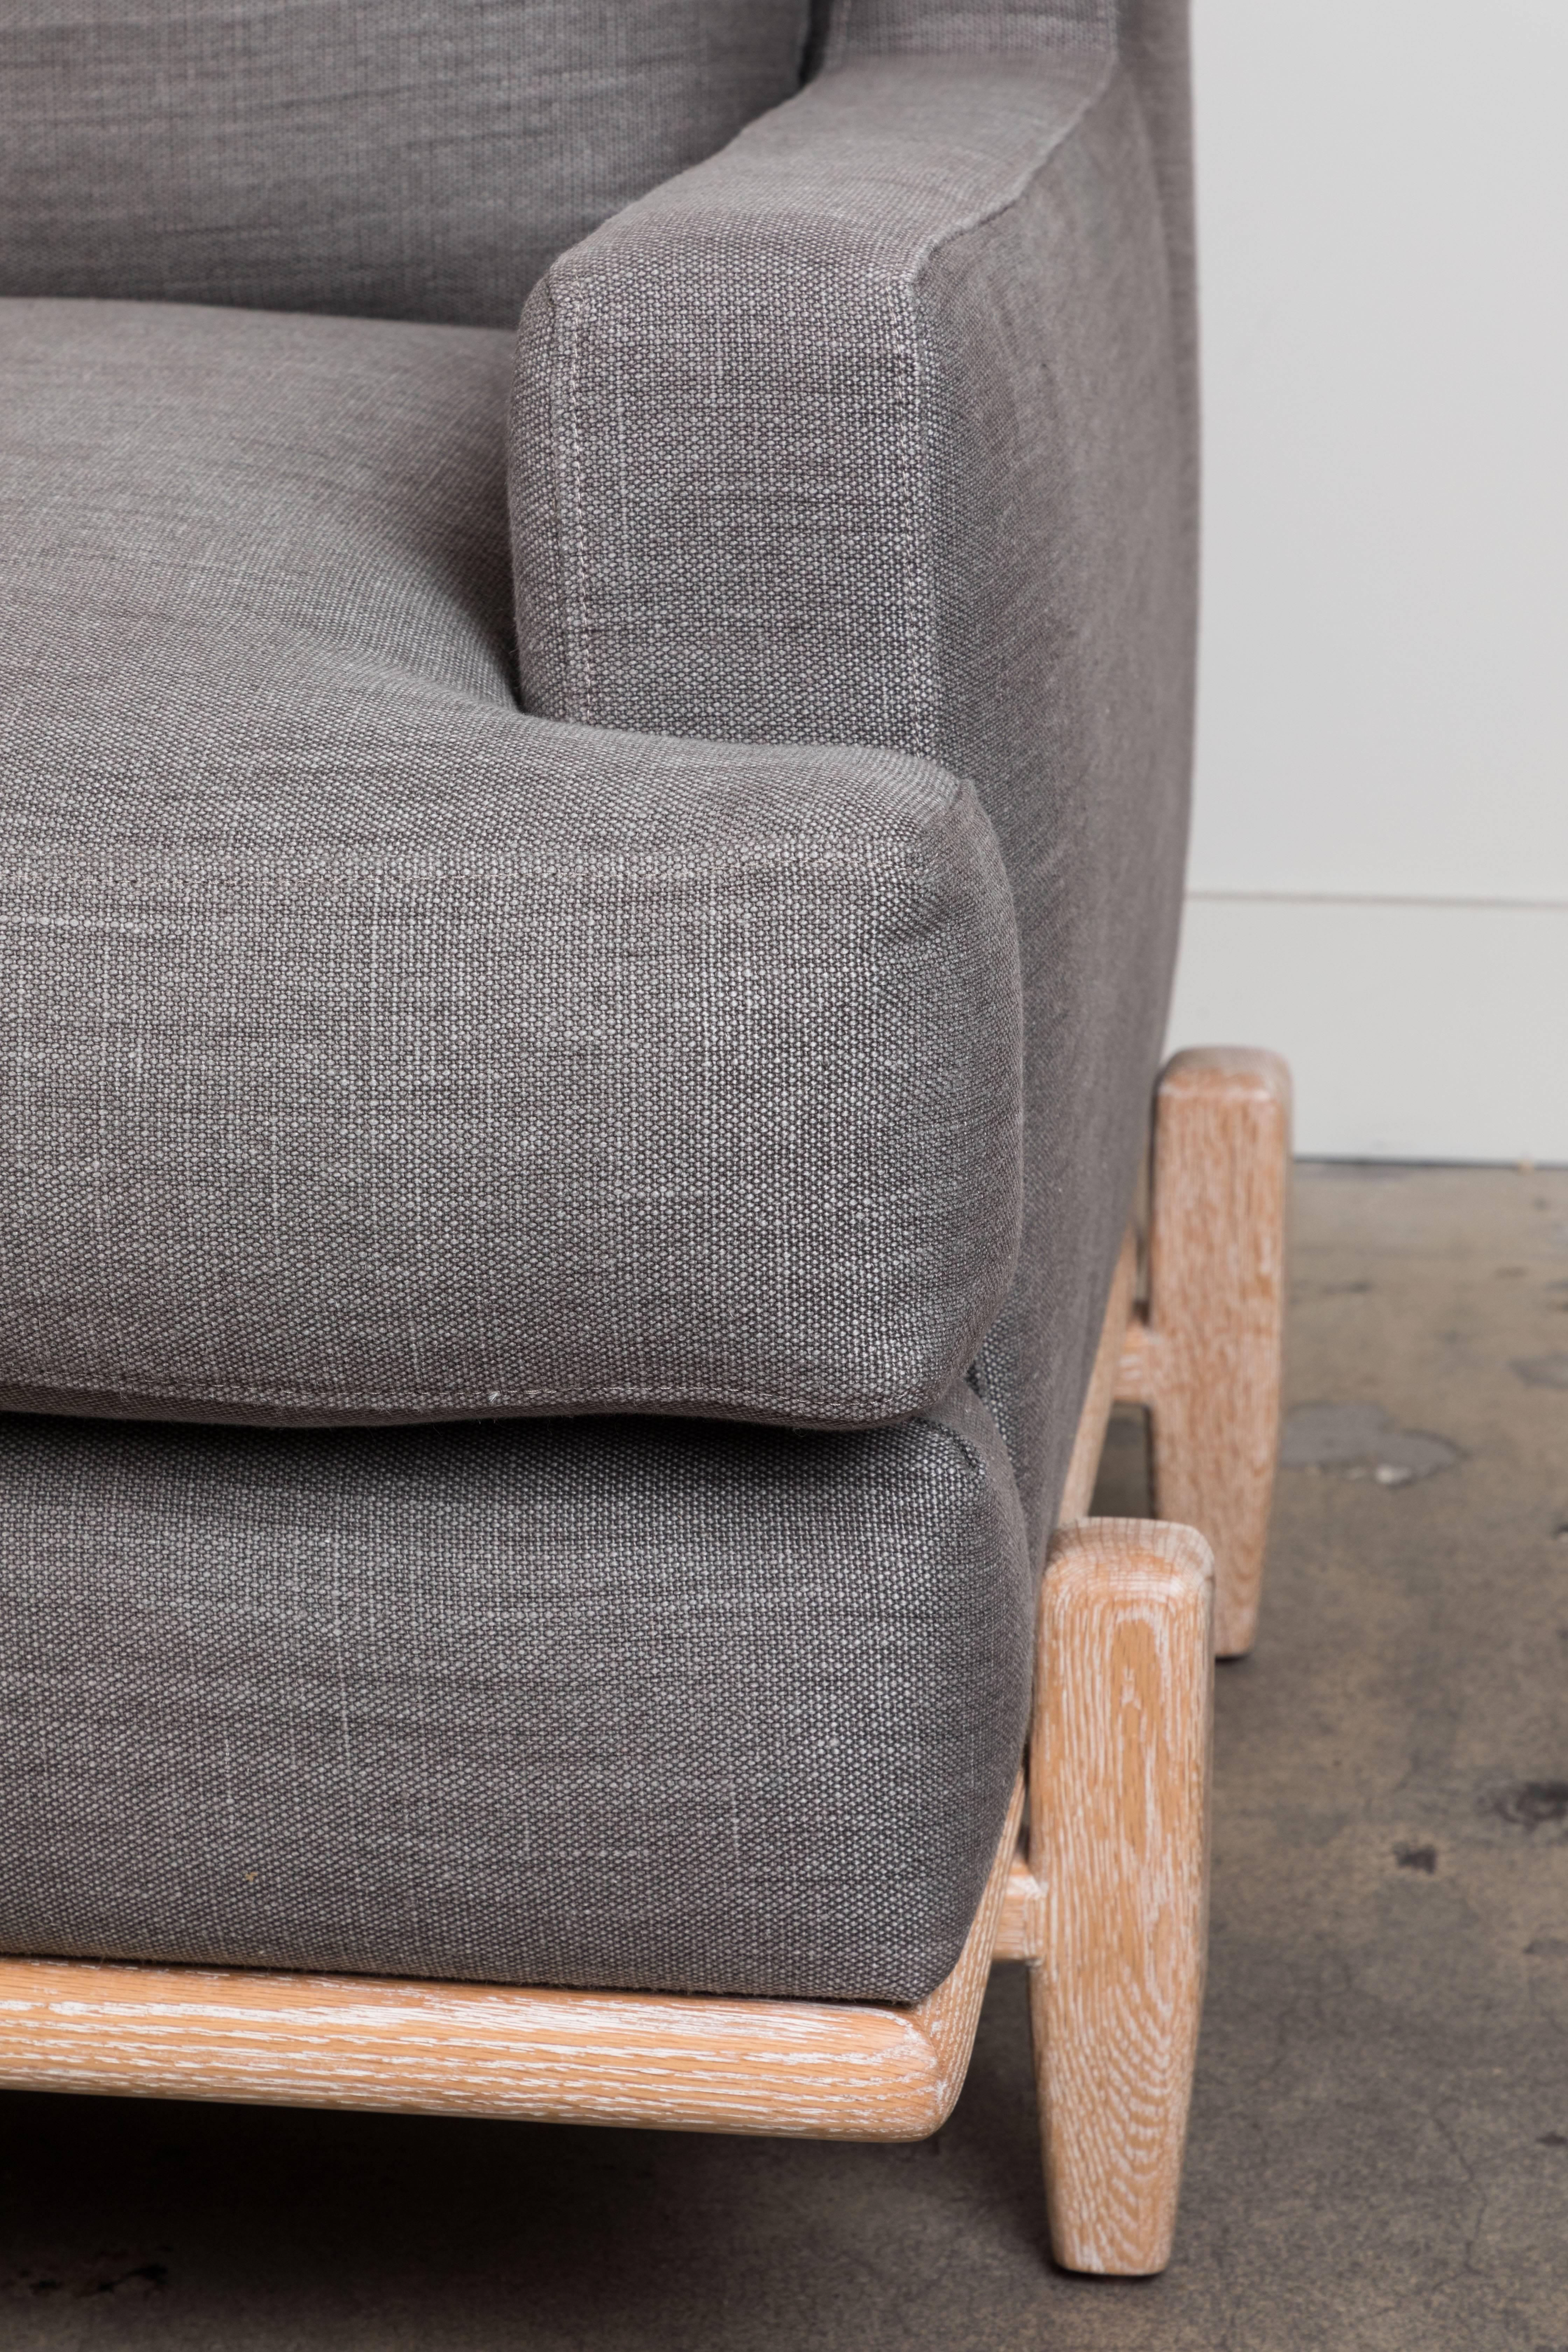 Oak George Chair by Brian Paquette for Lawson-Fenning